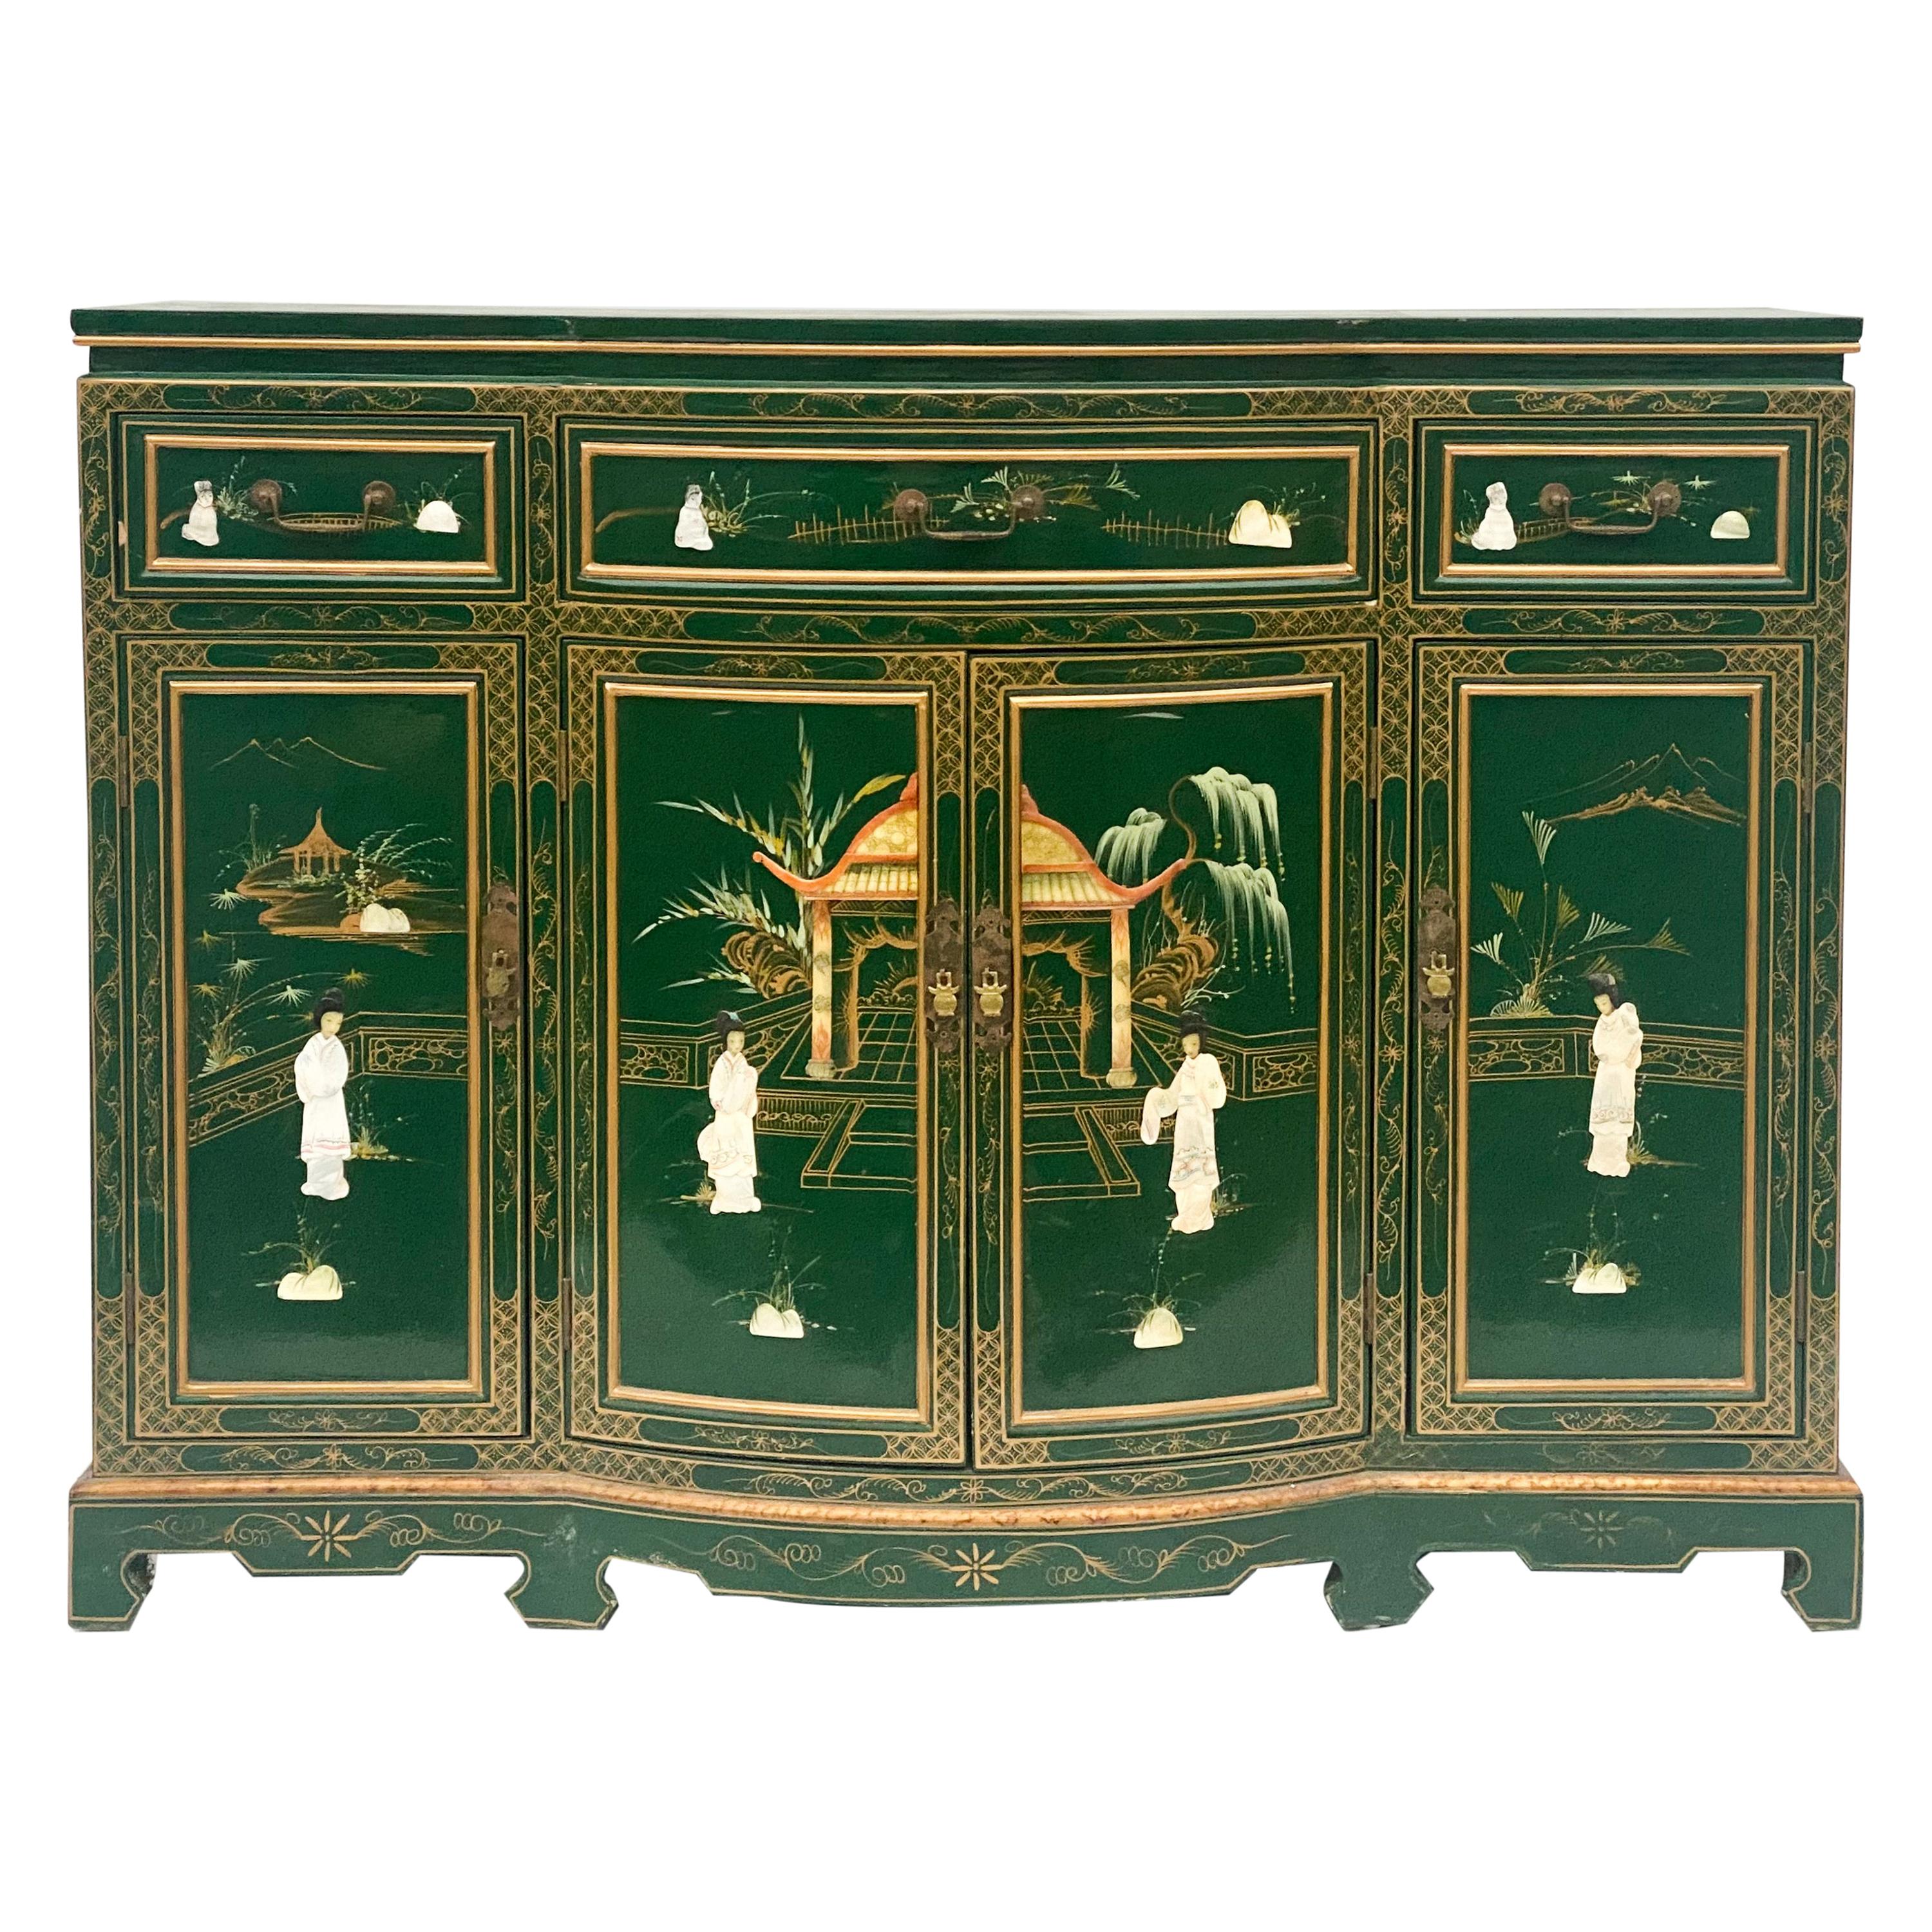 Late 20th C. Green Lacquered Chinoiserie Chippendale Style Sideboard / Credenza